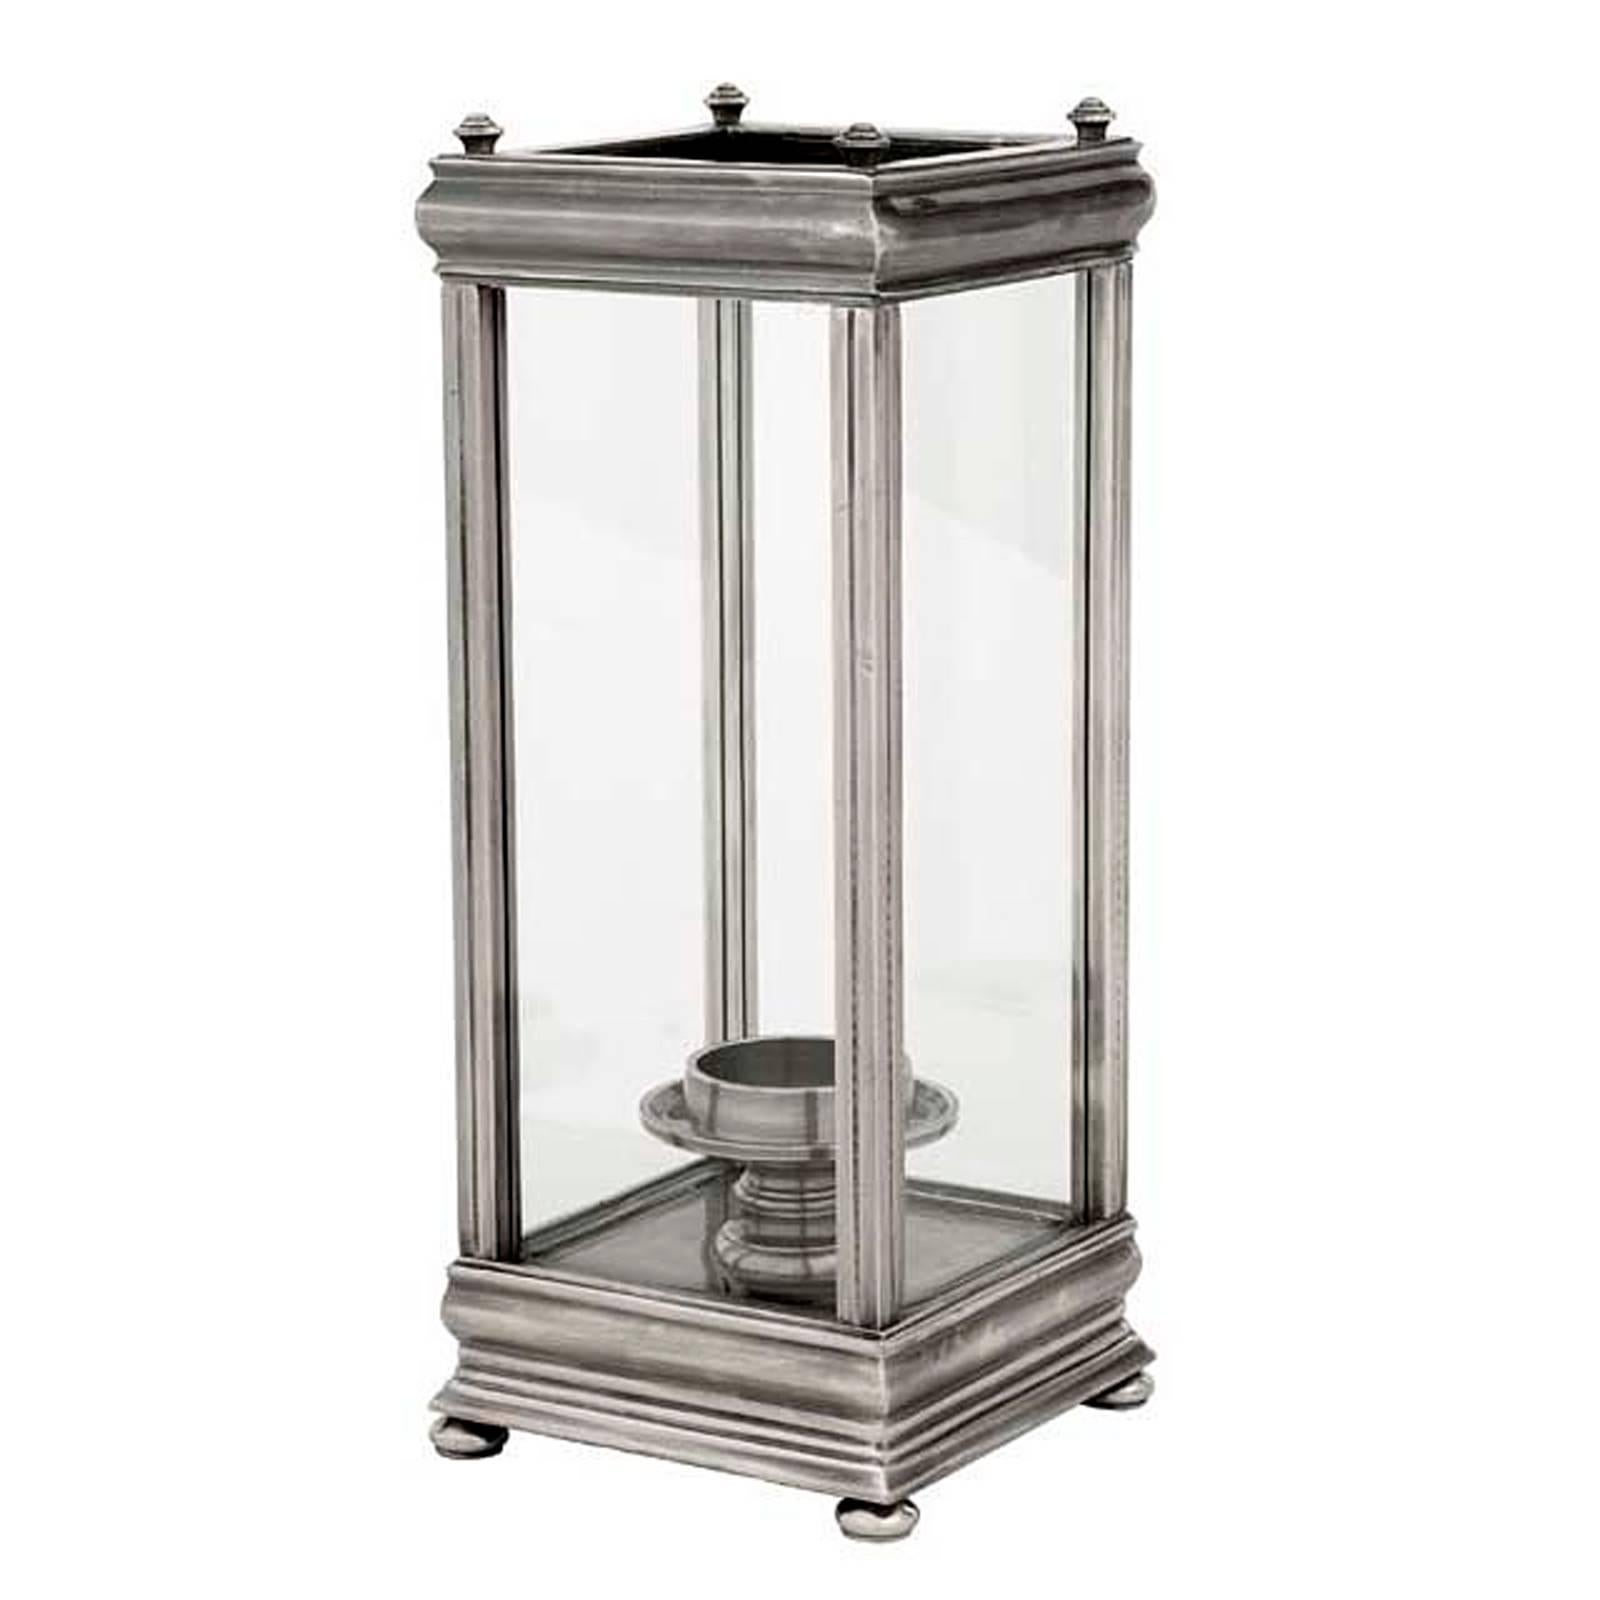 Albert Hurricaine in Gunmetal Finish or Antique Silver Plated Finish 3